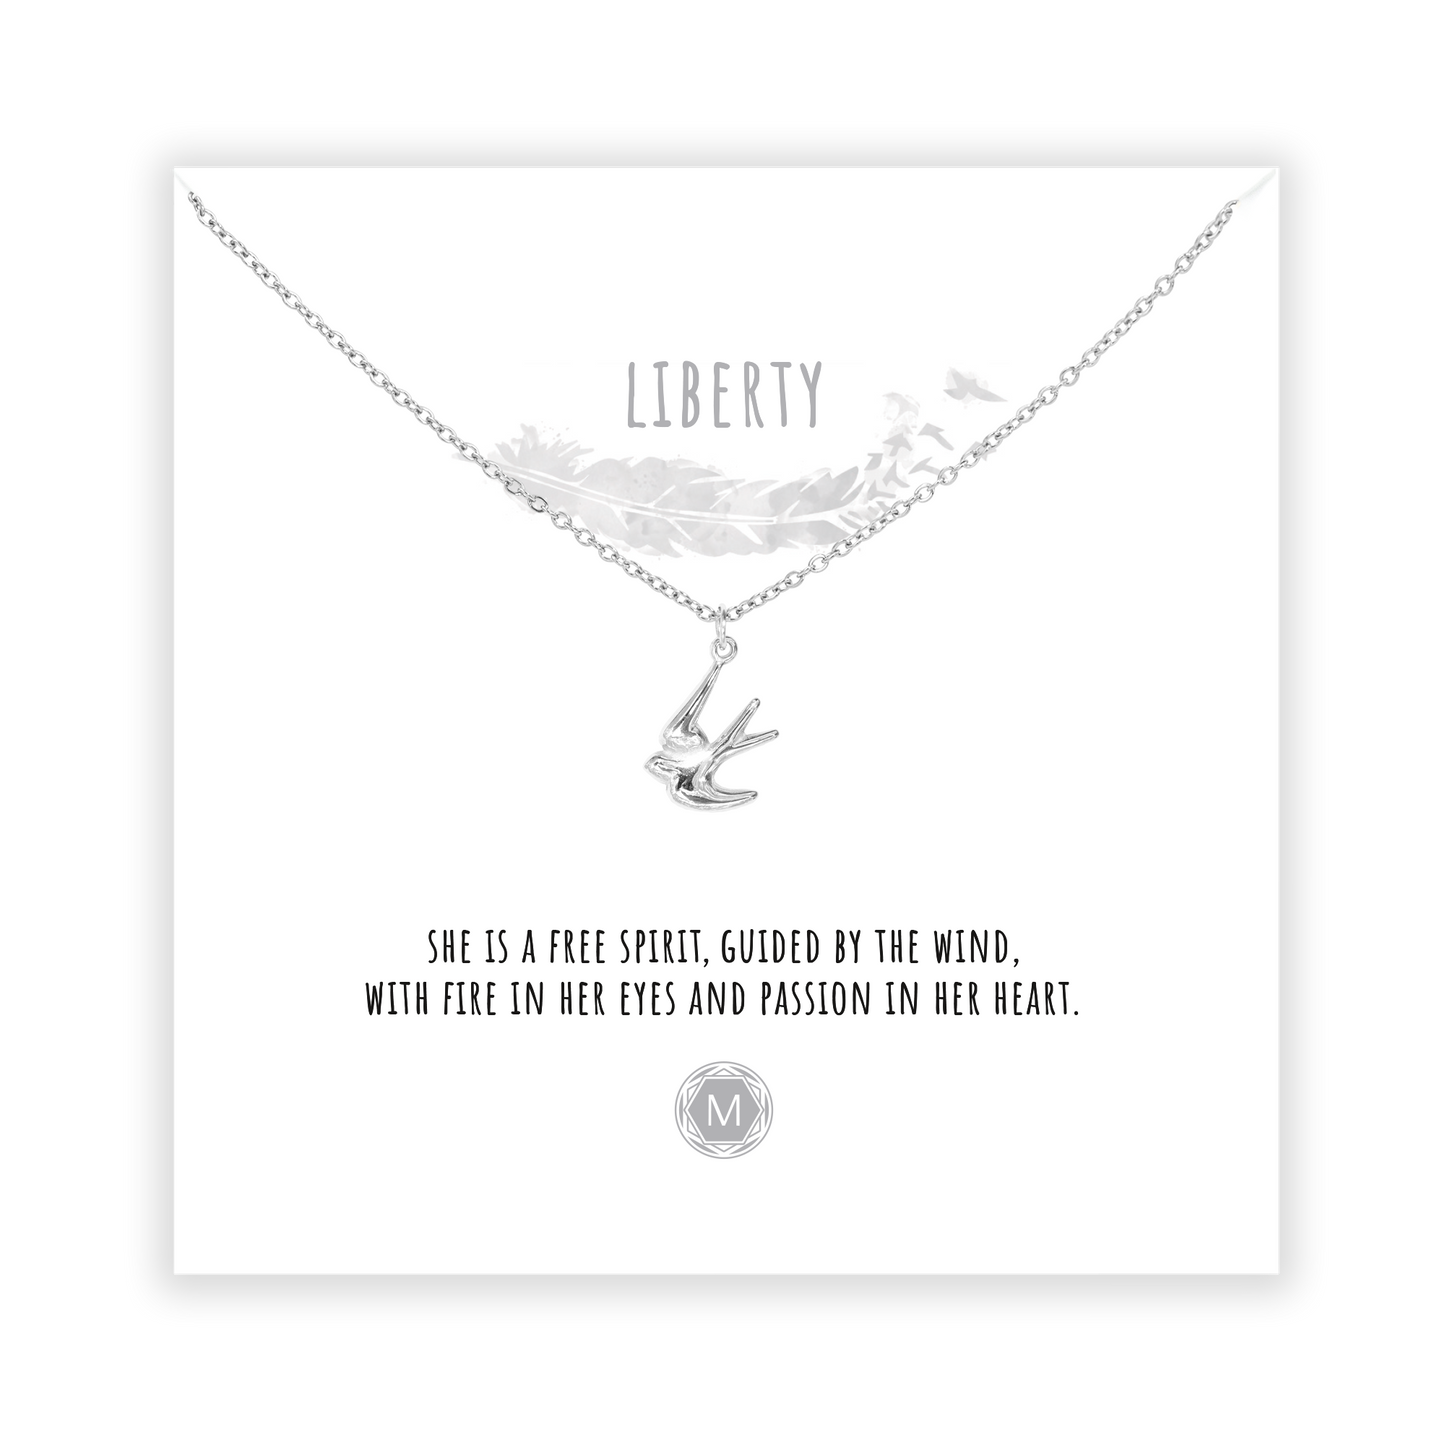 LIBERTY Necklace